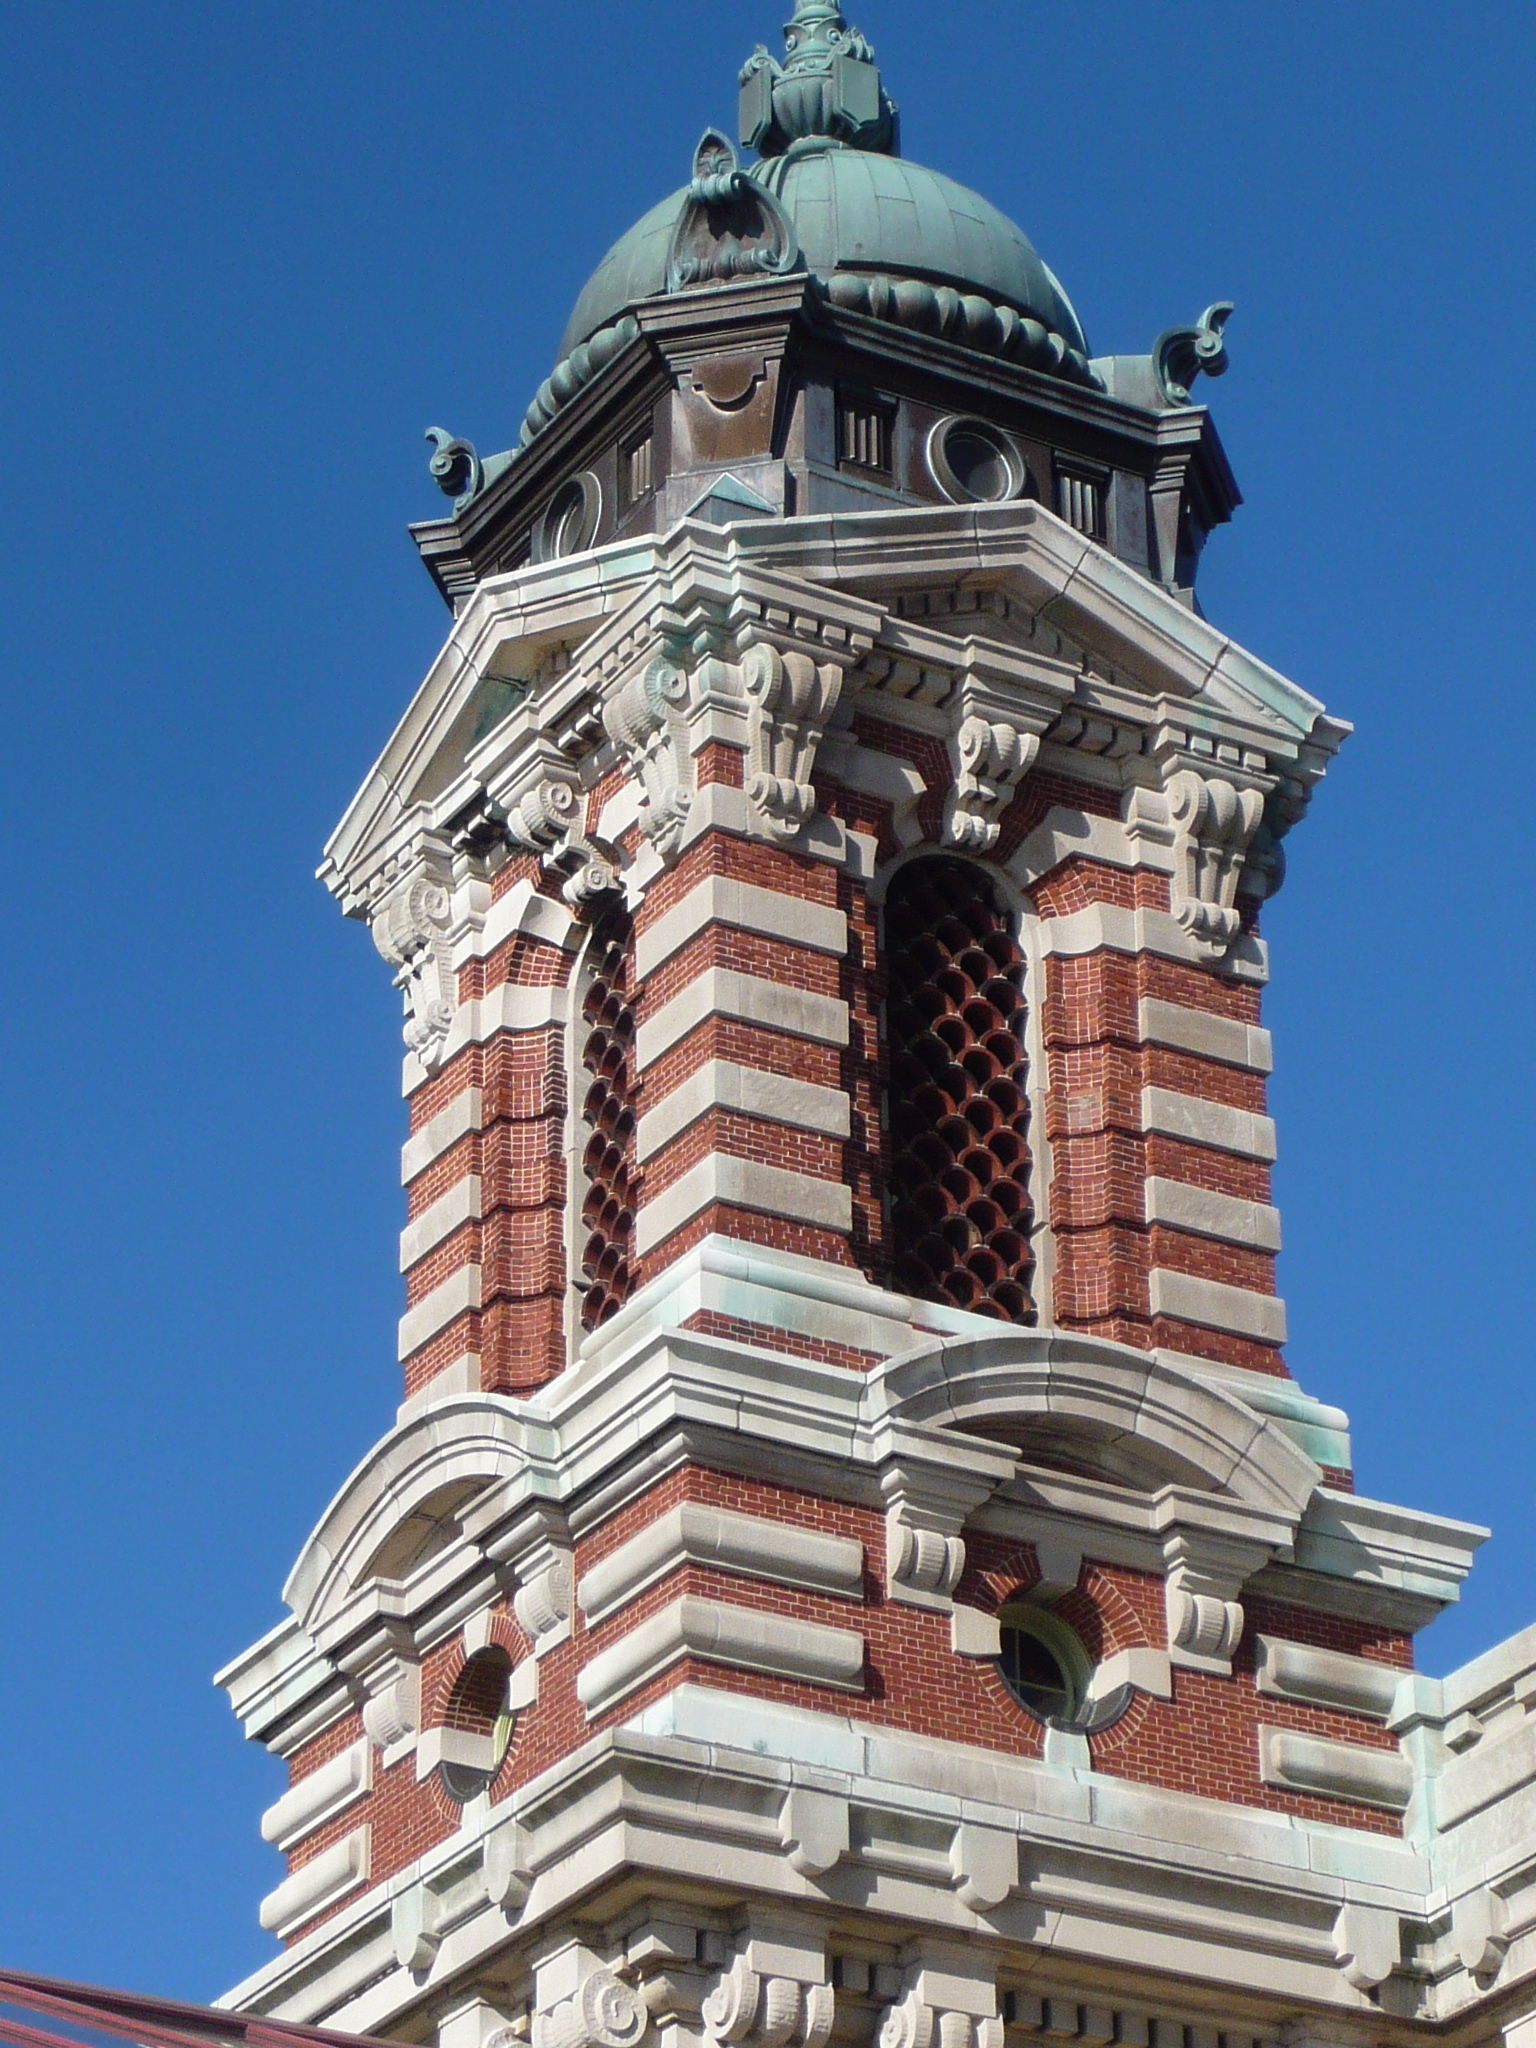 an old brick clock tower with a weather vein